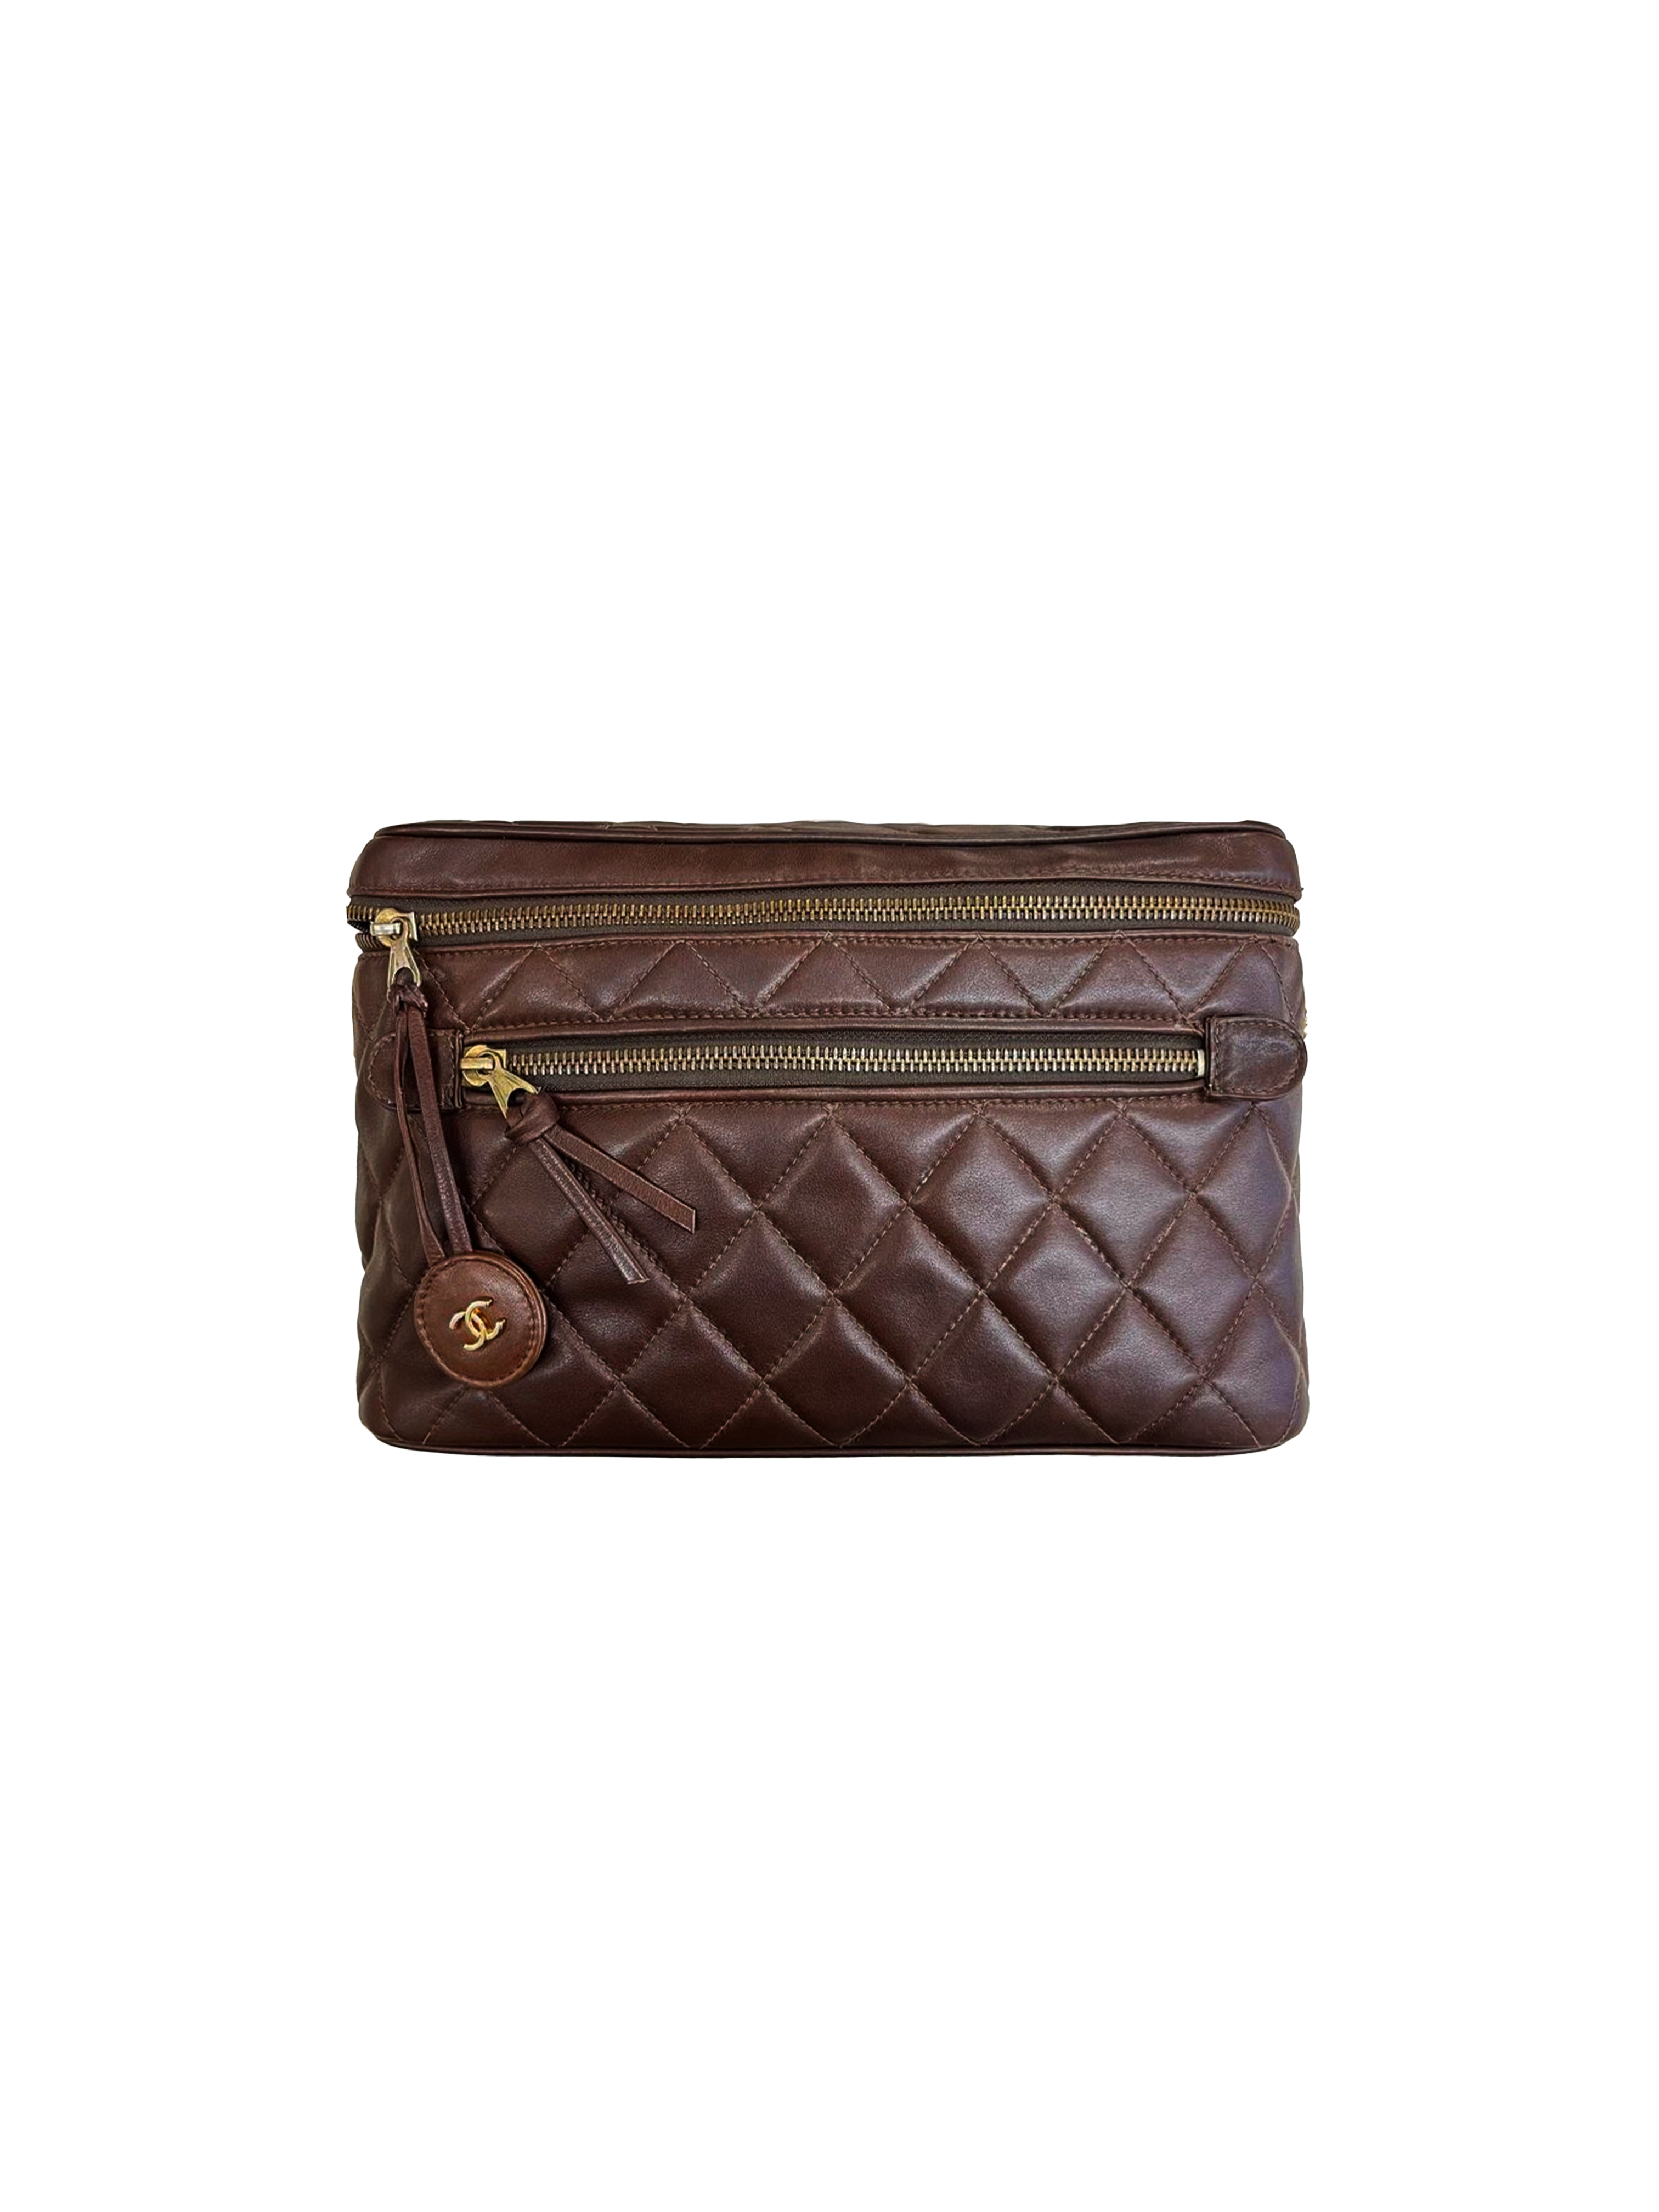 Chanel Early 1980s Chocolate Brown Camera Bag